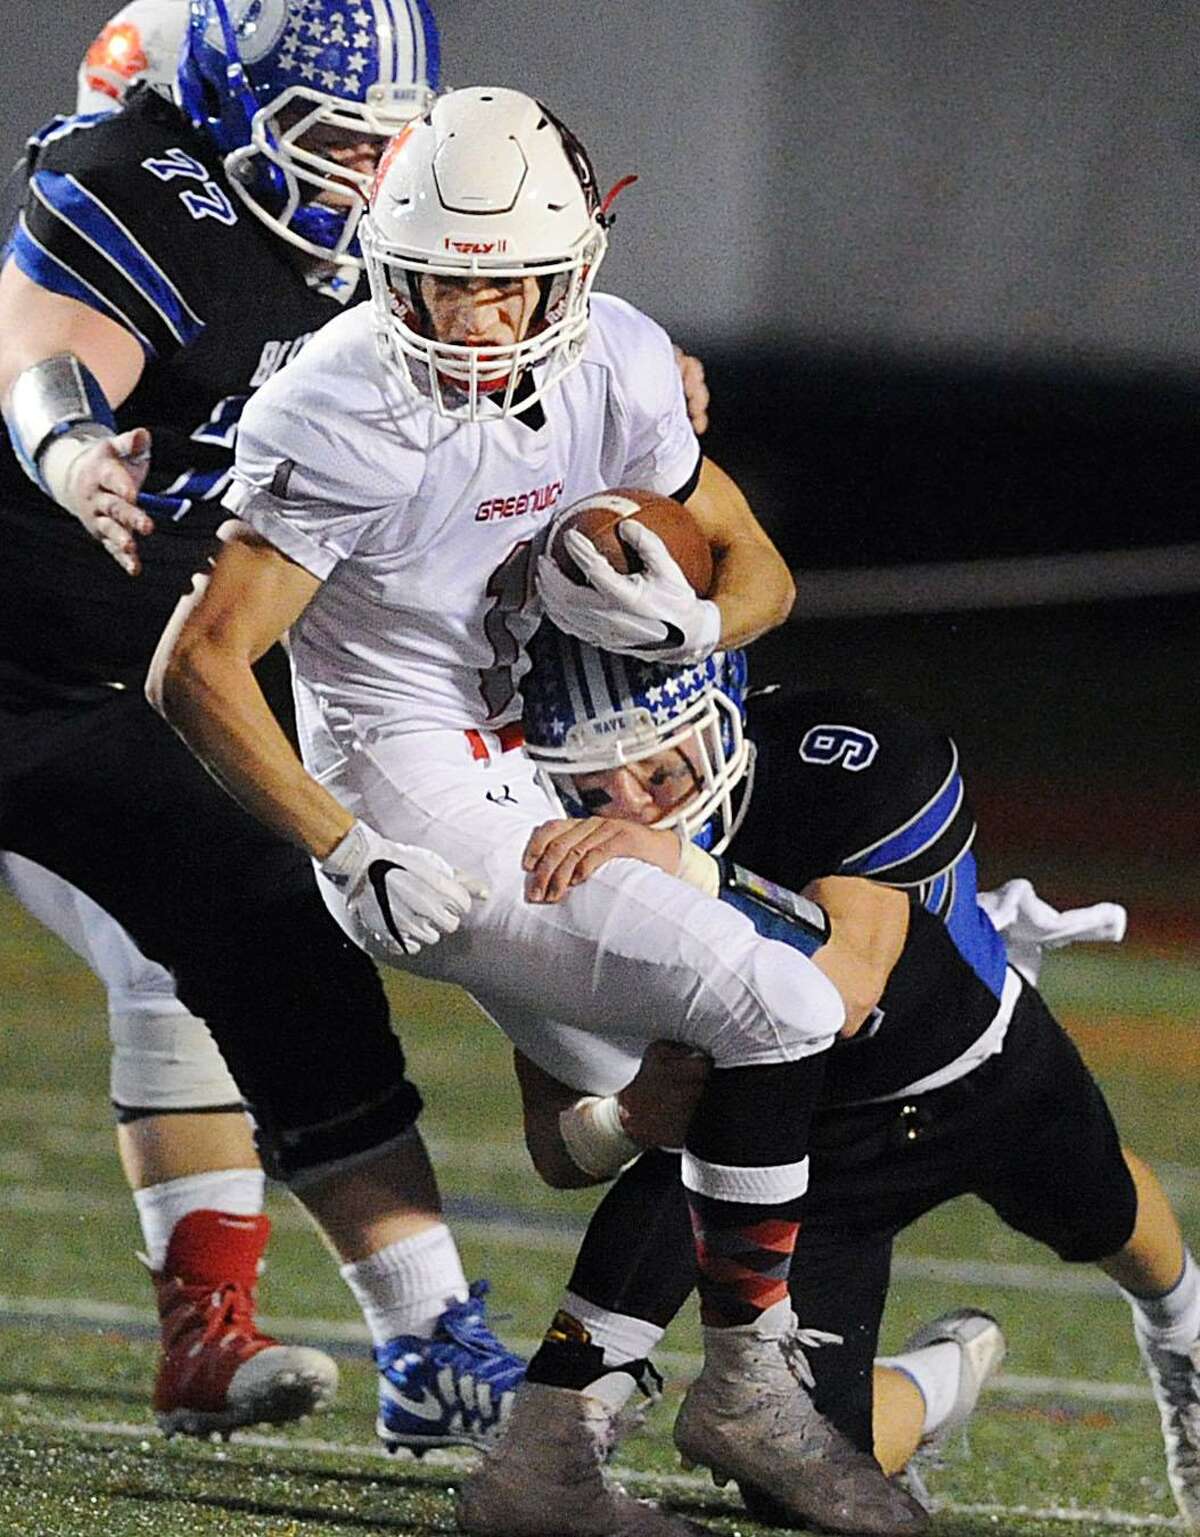 Greeniwch running back Kevin Iobbi (2), center, is tackled by Darien defenders Finlay Collins (9), right, and Justin Plank (77) during the Class LL playoff game between Greenwich and Darien at Stamford High School on Nov. 29. Iobbi was a All-FCIAC First-team selection and helped the Cardinals vastly improve.